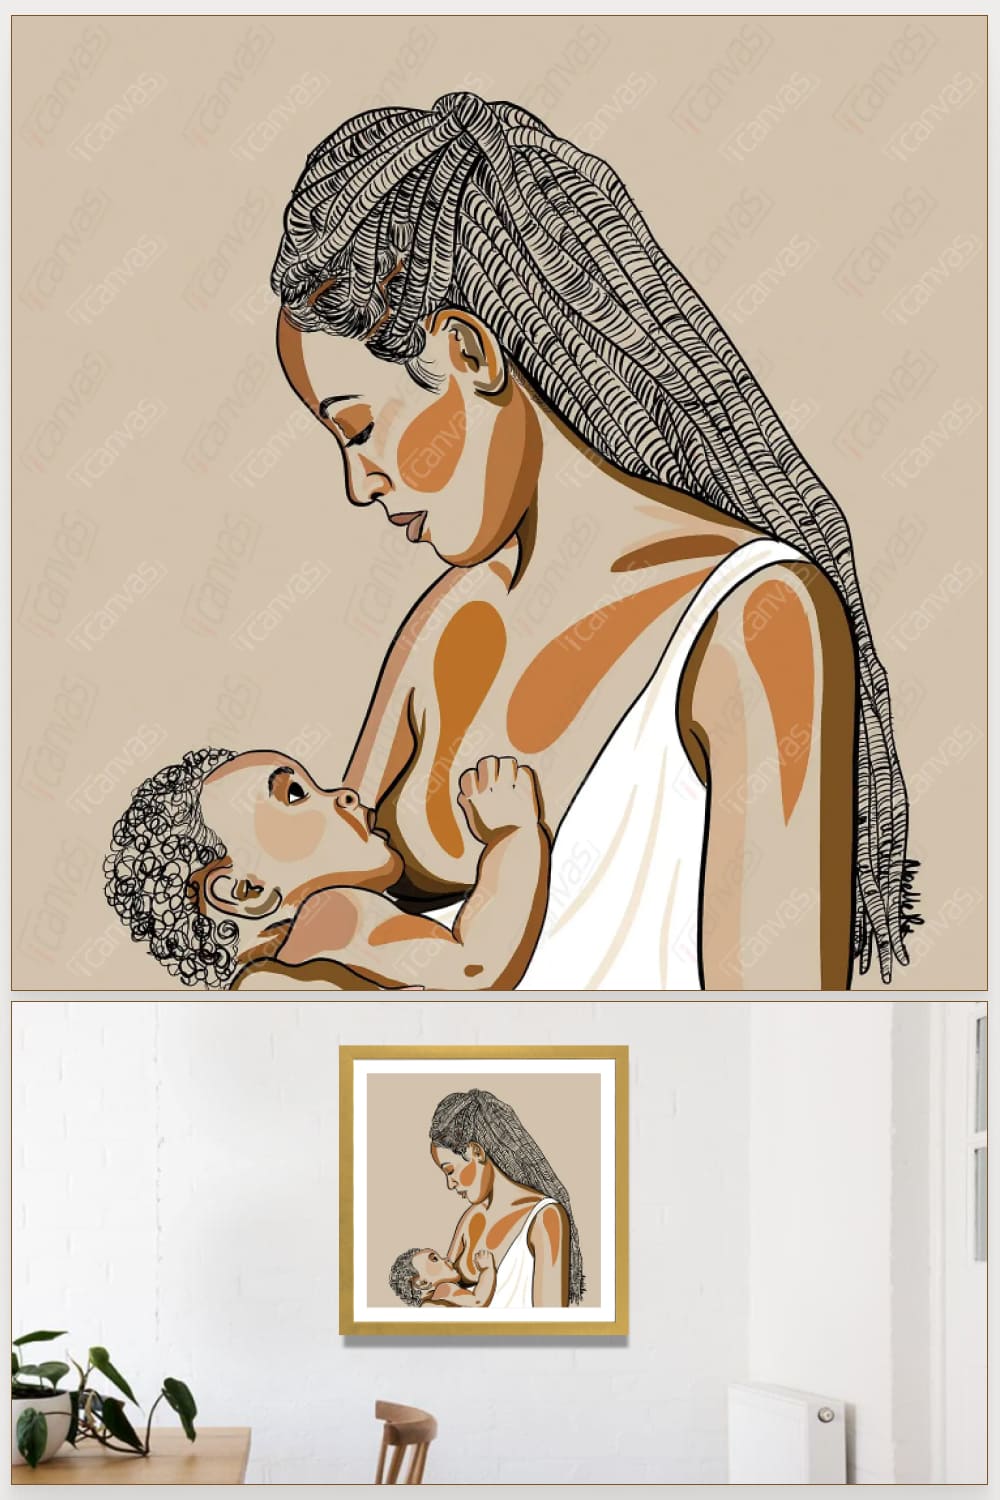 Image of a dark-skinned woman in a white tunic who is breastfeeding a baby.